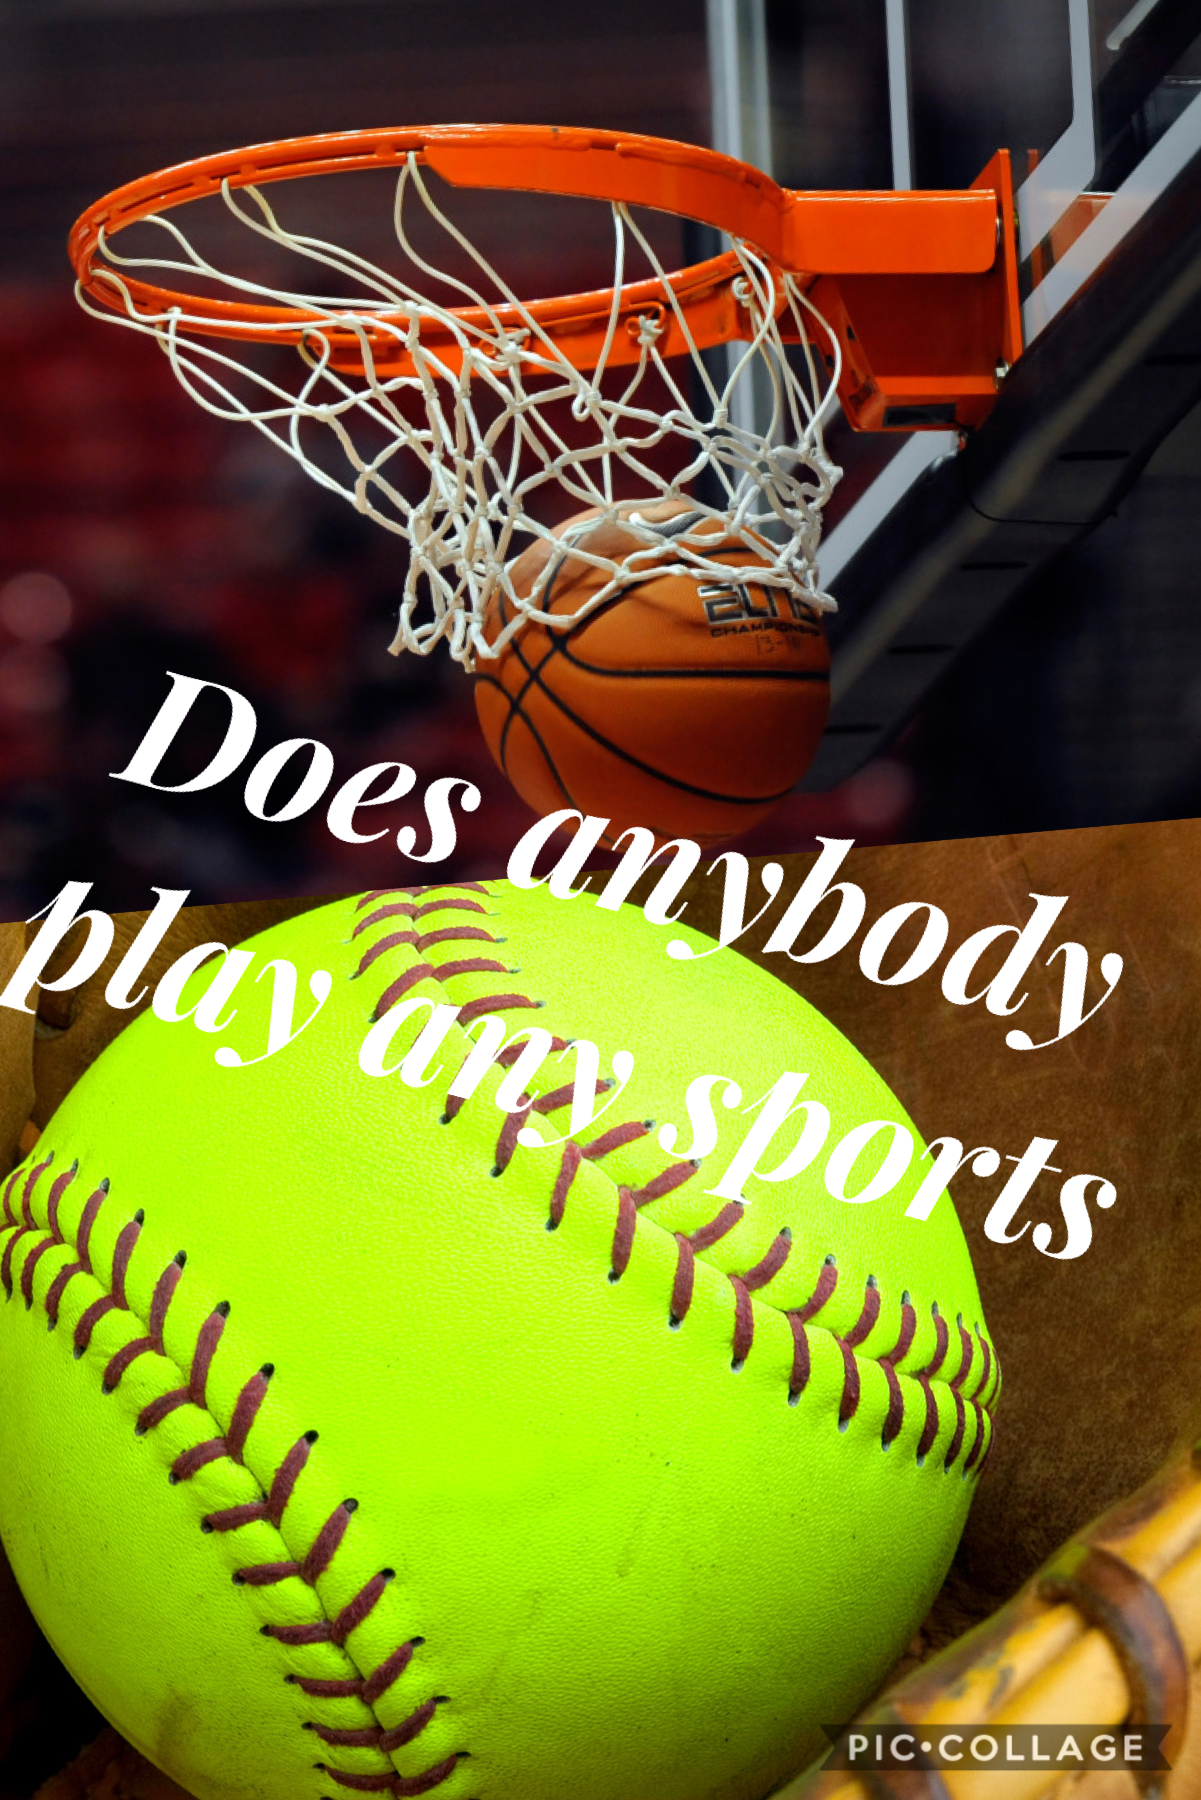 Do you play any sports just trying to get to know my followers better 